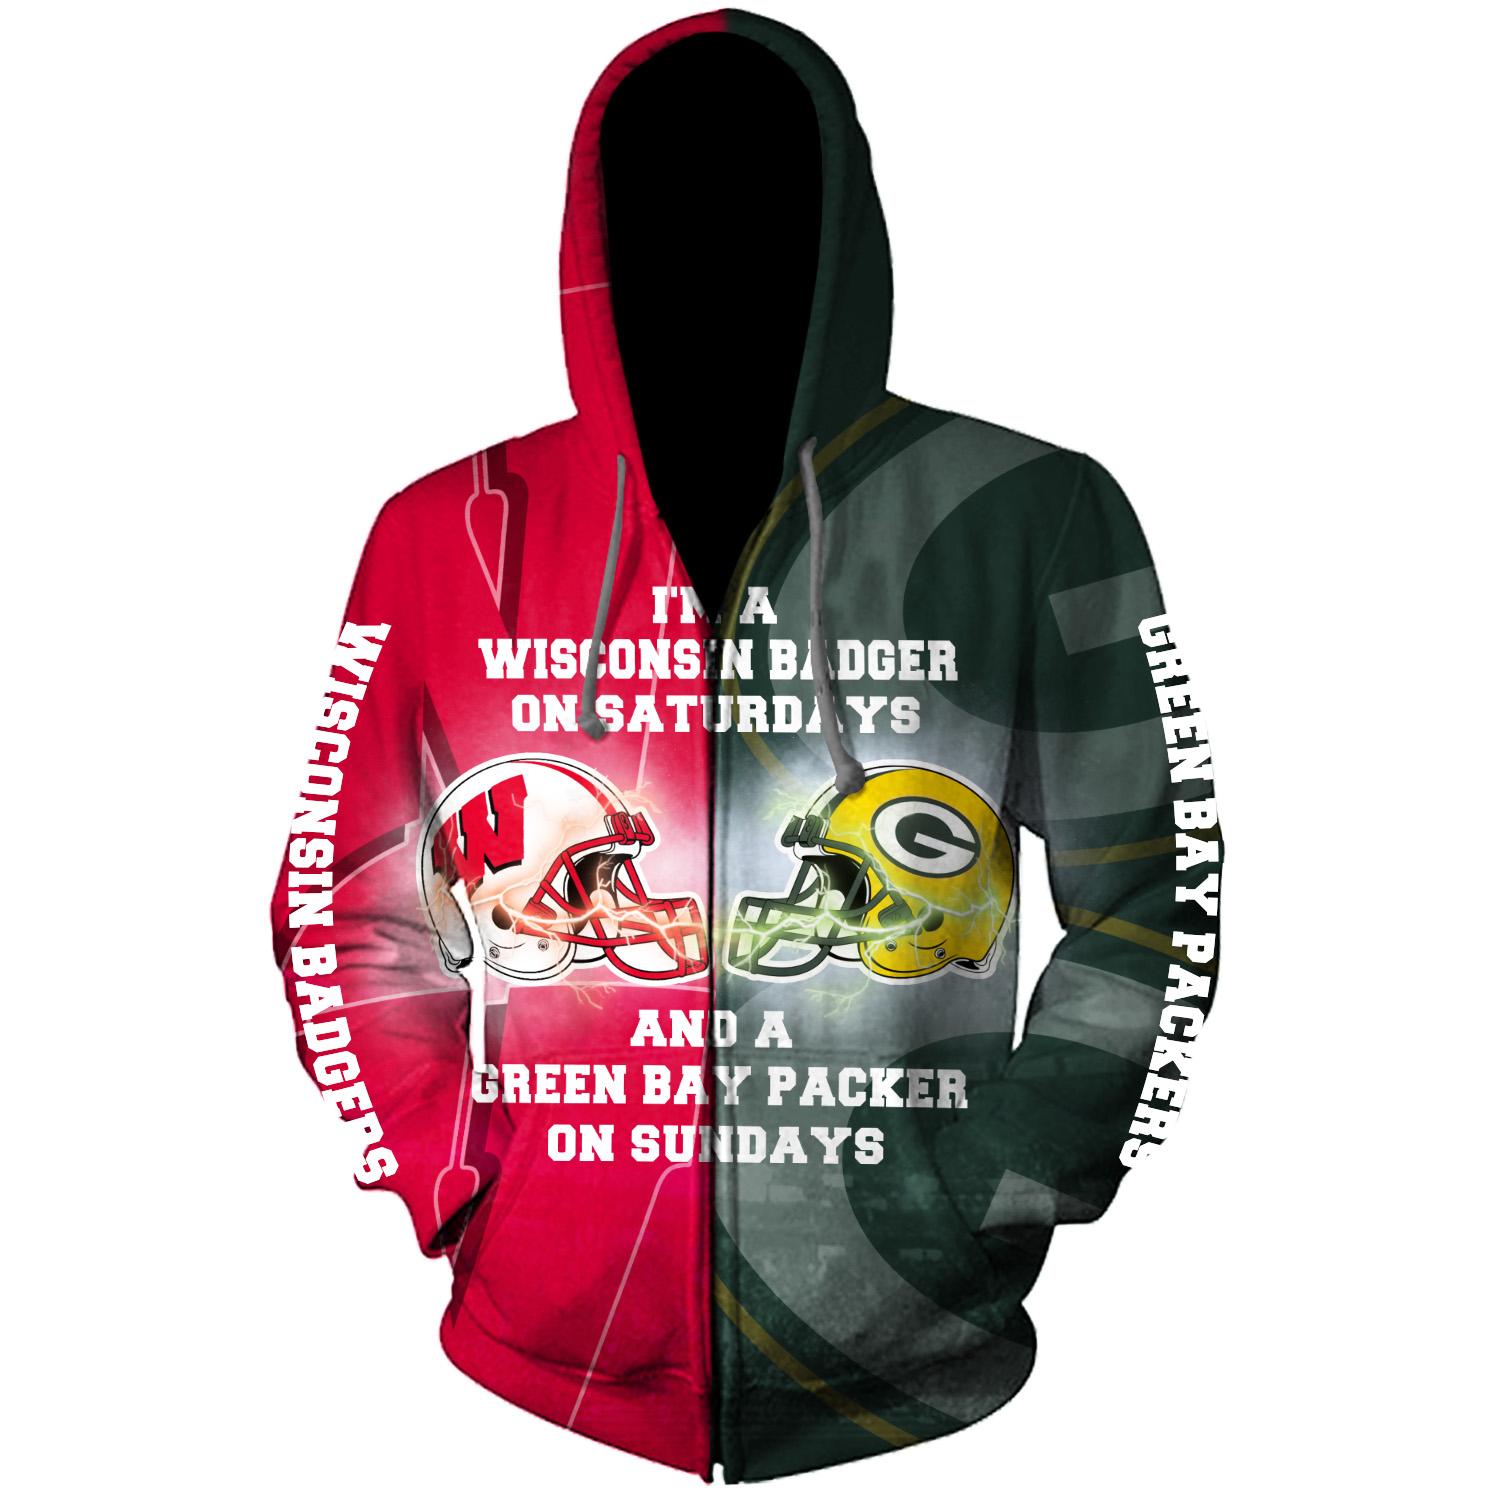 I’m a wisconsin badgers on saturdays and a green bay packers on sundays 3d zip hoodie